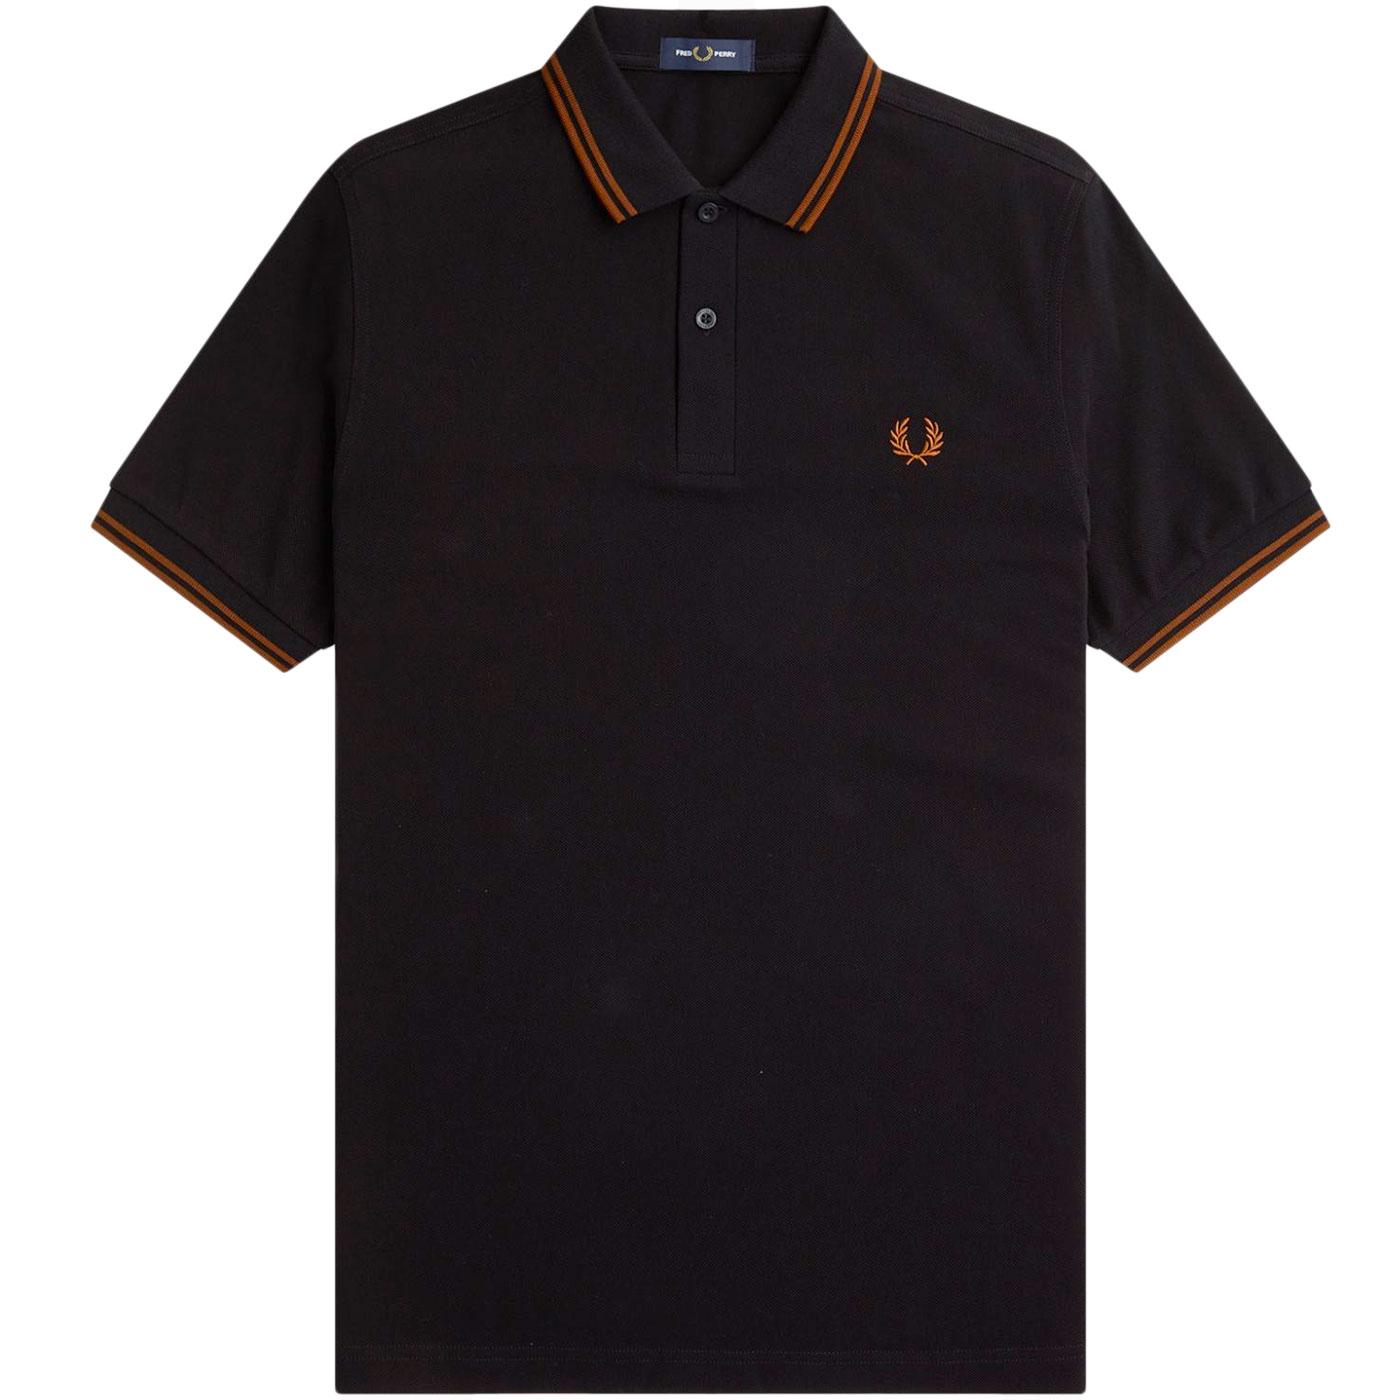 FRED PERRY M3600 Mod Twin Tipped Polo Shirt B/WB